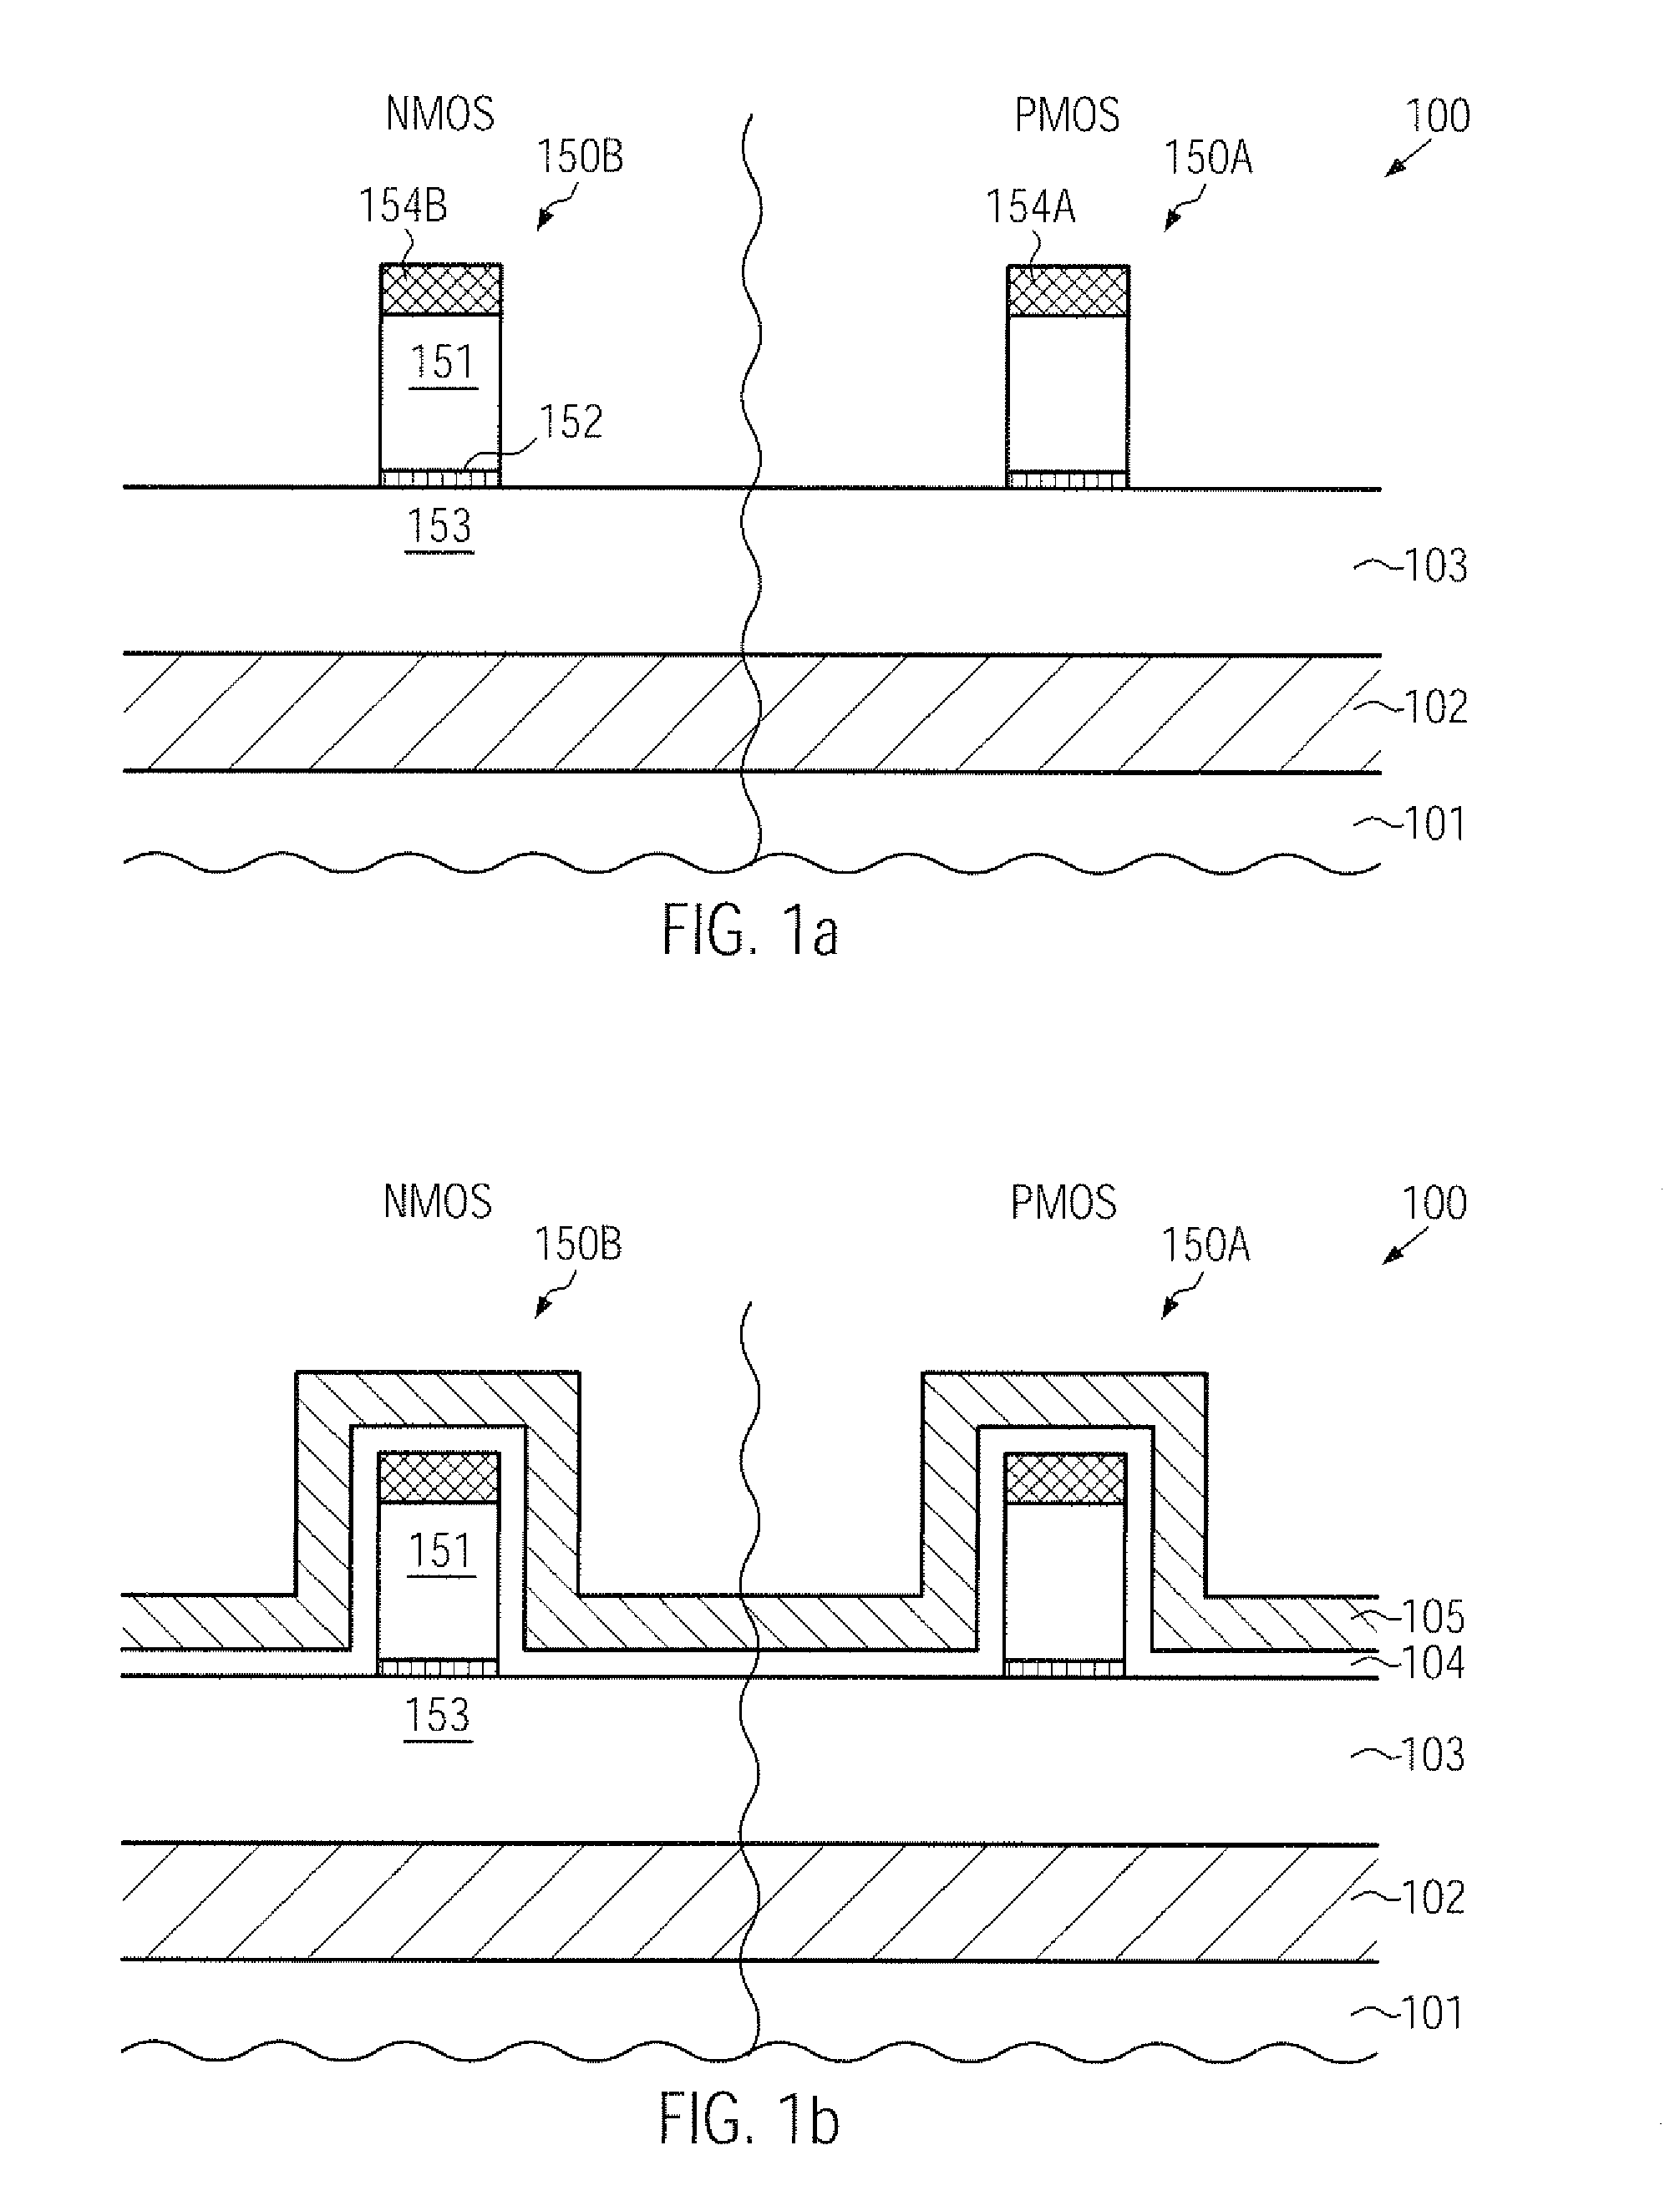 CMOS device comprising an nmos transistor with recessed drain and source areas and a pmos transistor having a silicon/germanium material in the drain and source areas